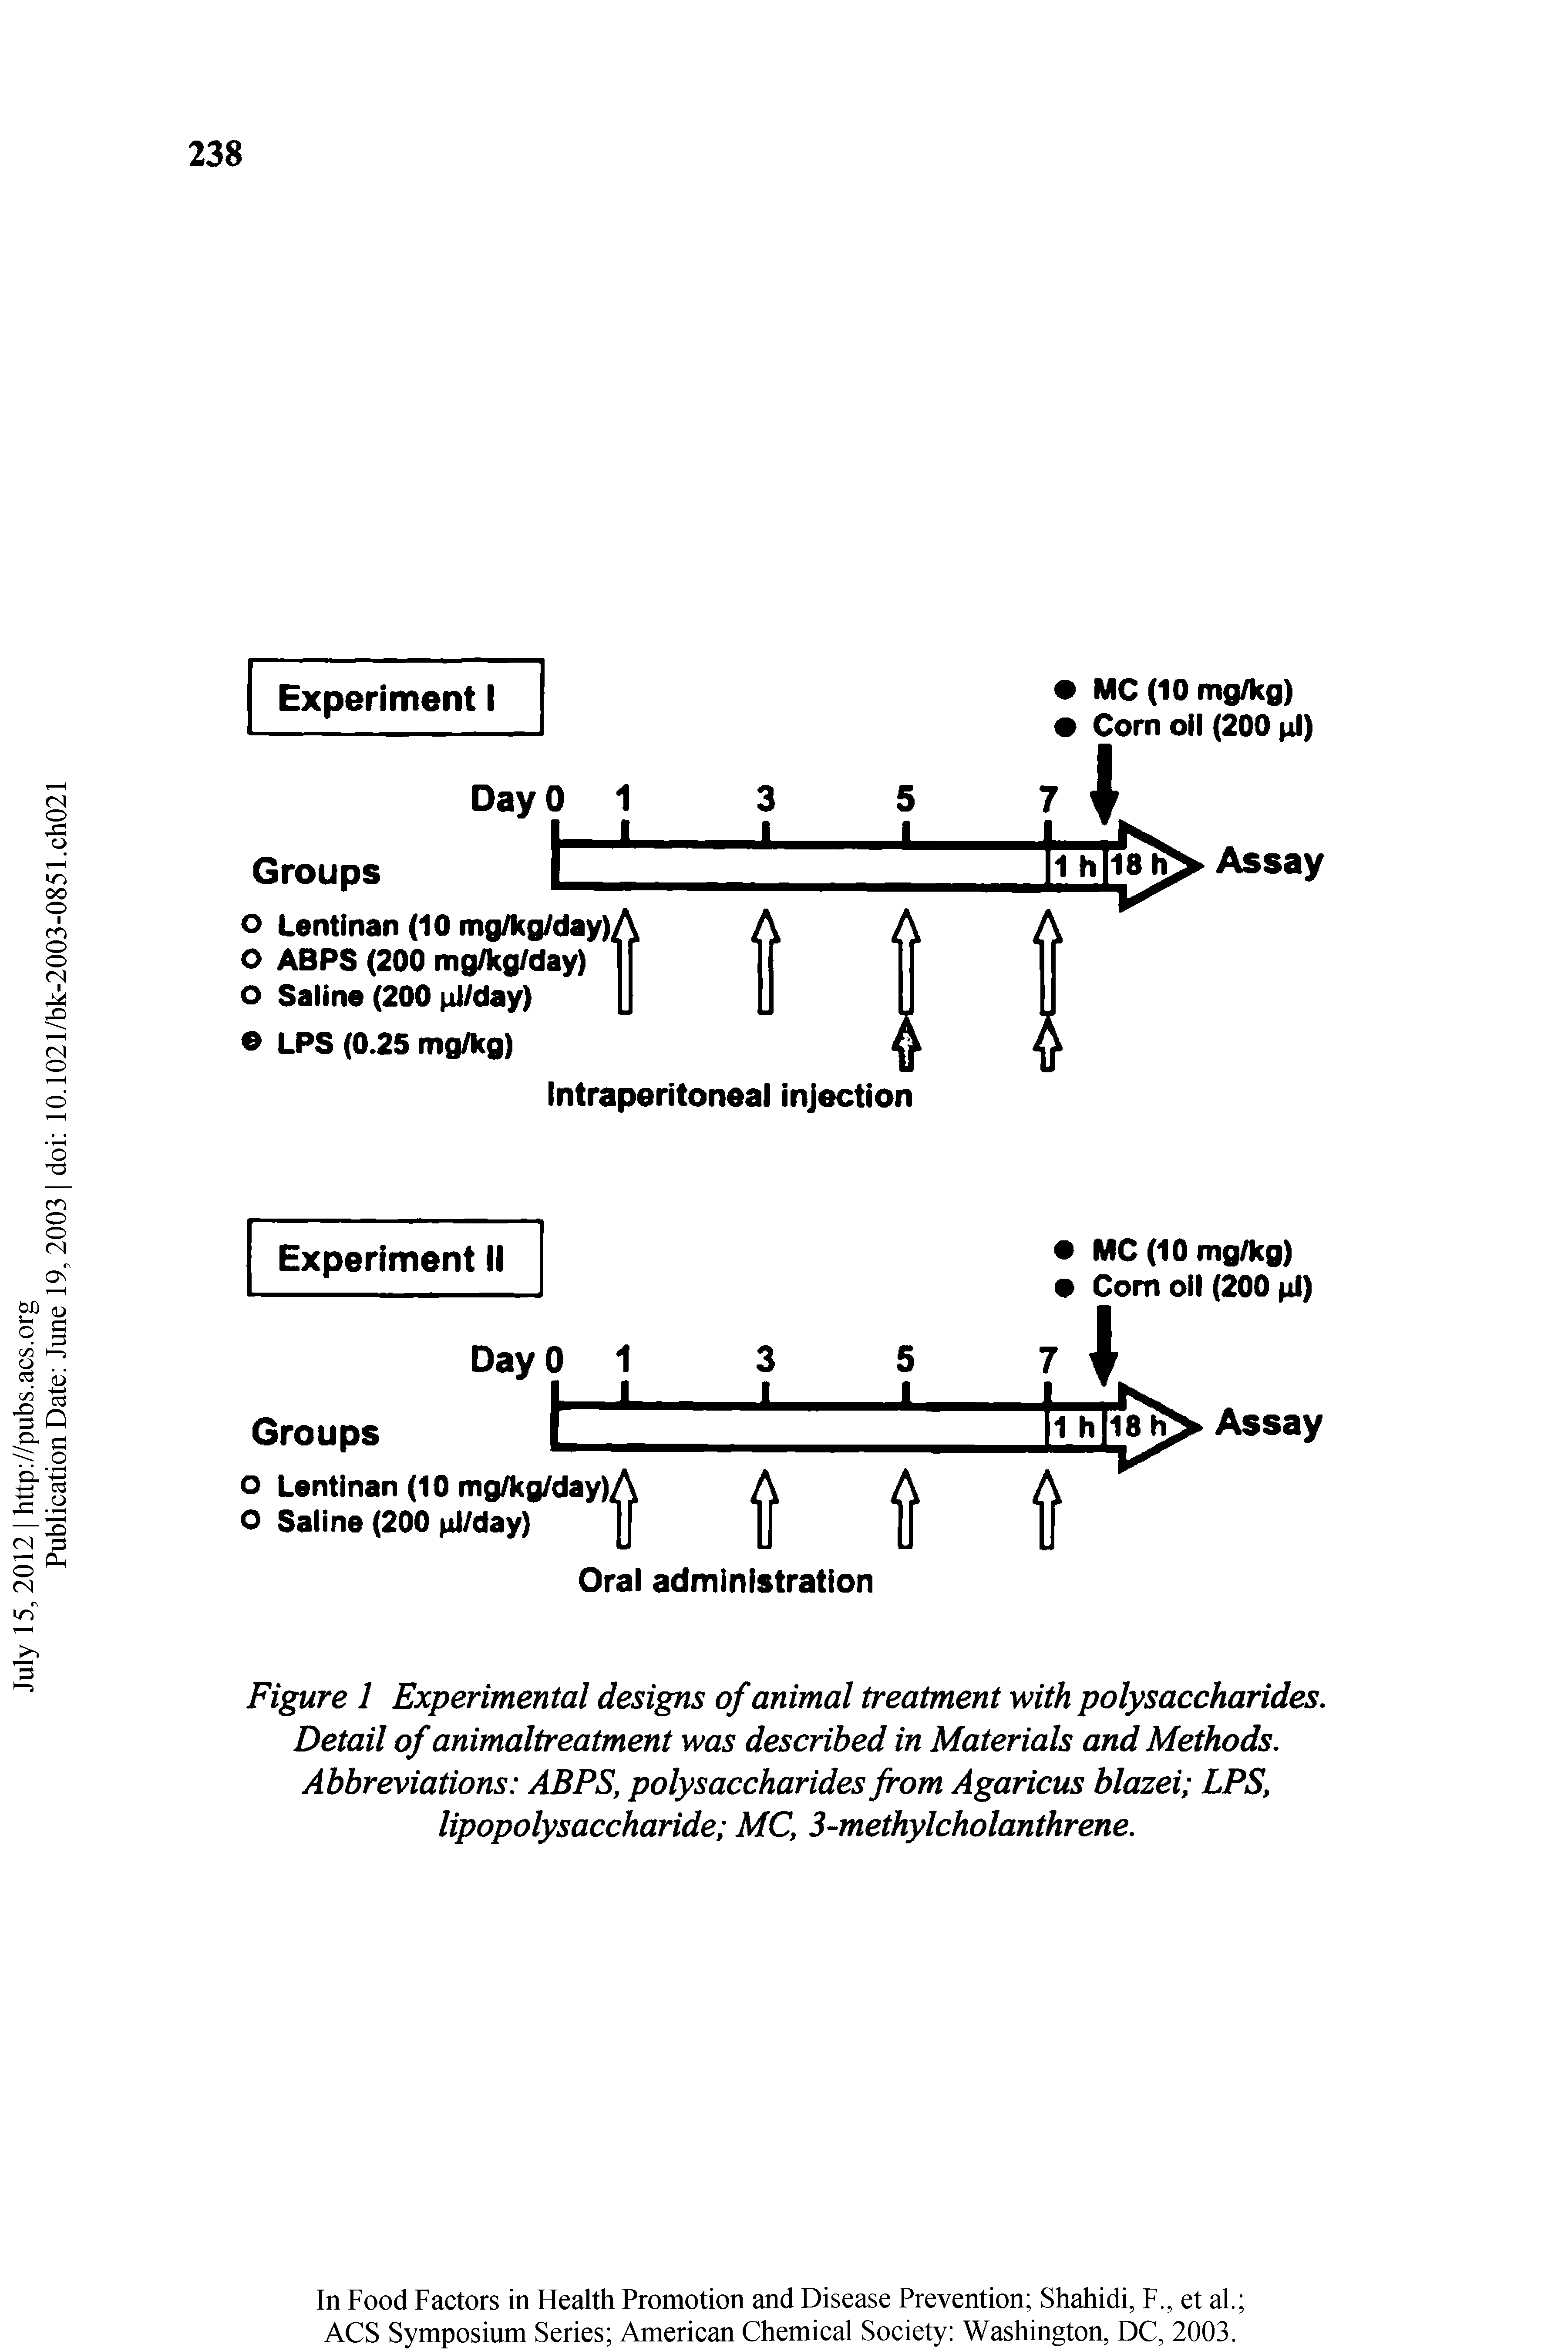 Figure 1 Experimental designs of animal treatment with polysaccharides. Detail of animaltreatment was described in Materials and Methods. Abbreviations ABPS, polysaccharides from Agaricus blazei LPS, lipopolysaccharide MC, 3-methylcholanthrene.